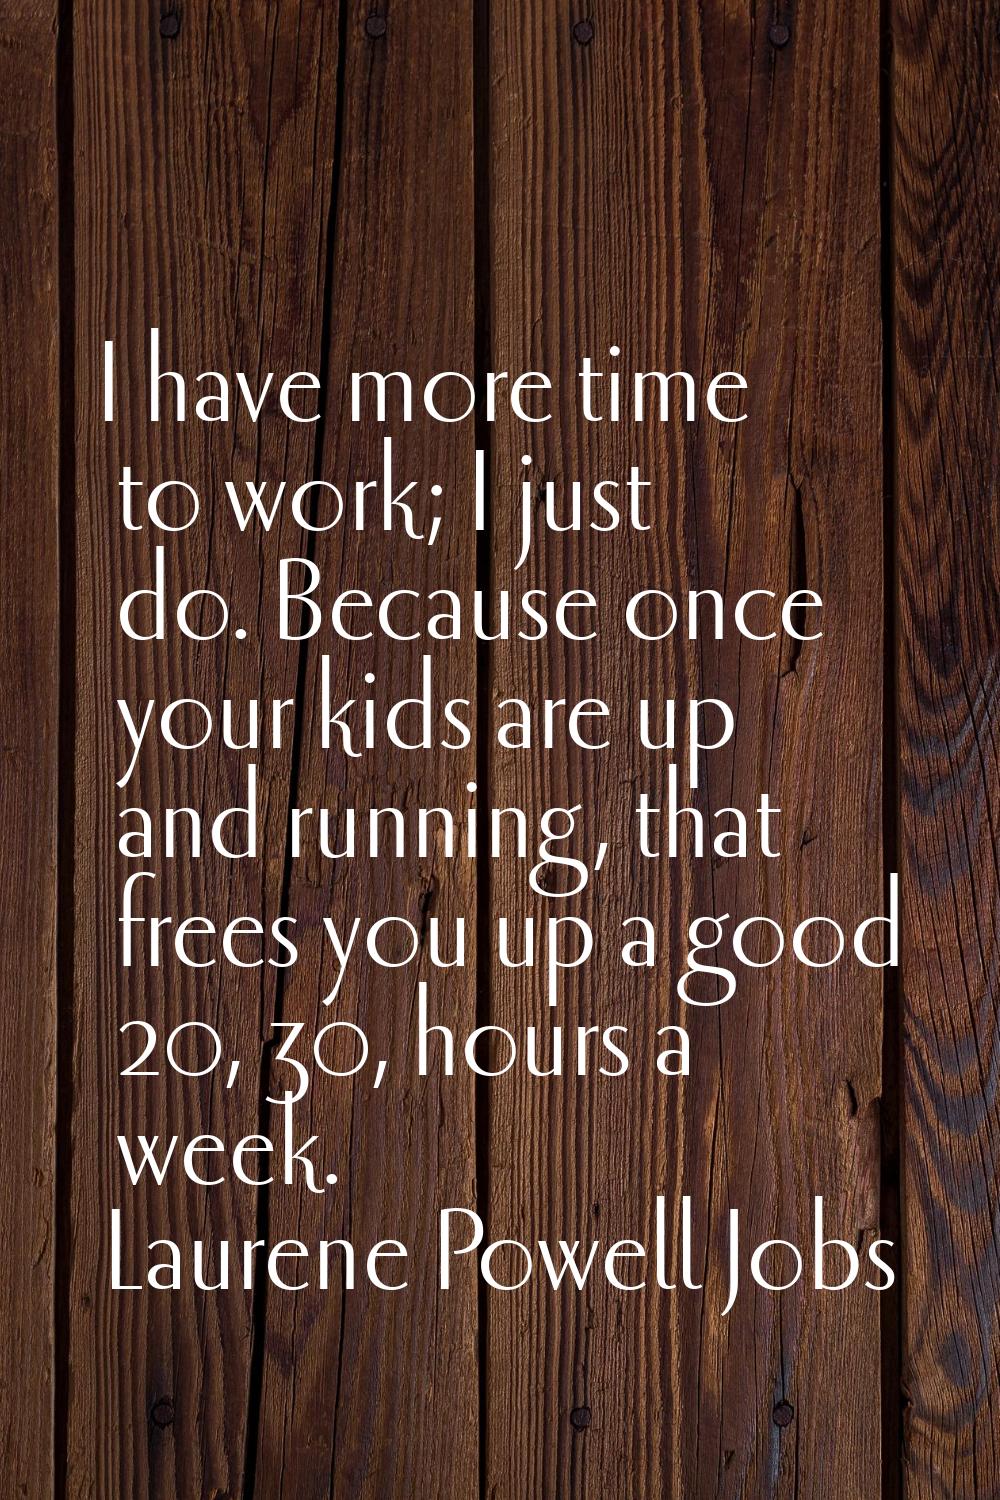 I have more time to work; I just do. Because once your kids are up and running, that frees you up a